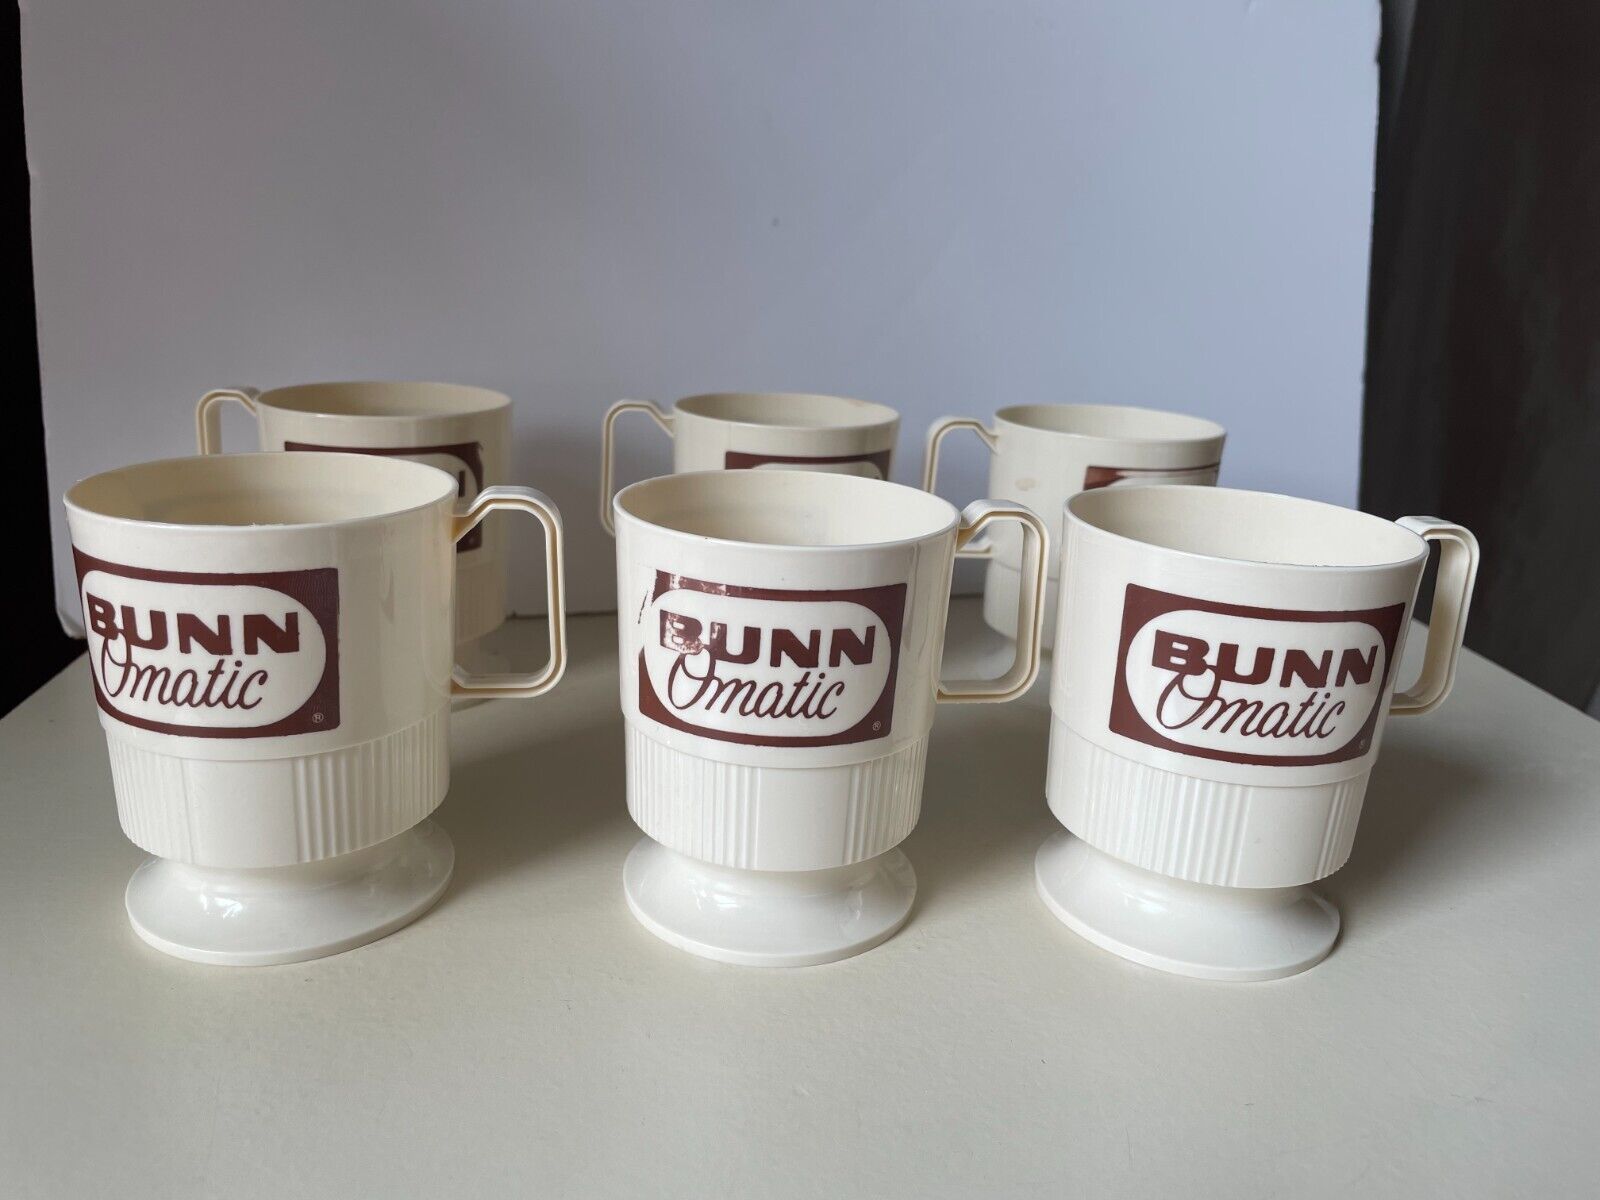 Lot 6 Vintage Bunn Omatic Coffee Plasti cCup 8 oz Advertising 70s 80s Diner Cafe